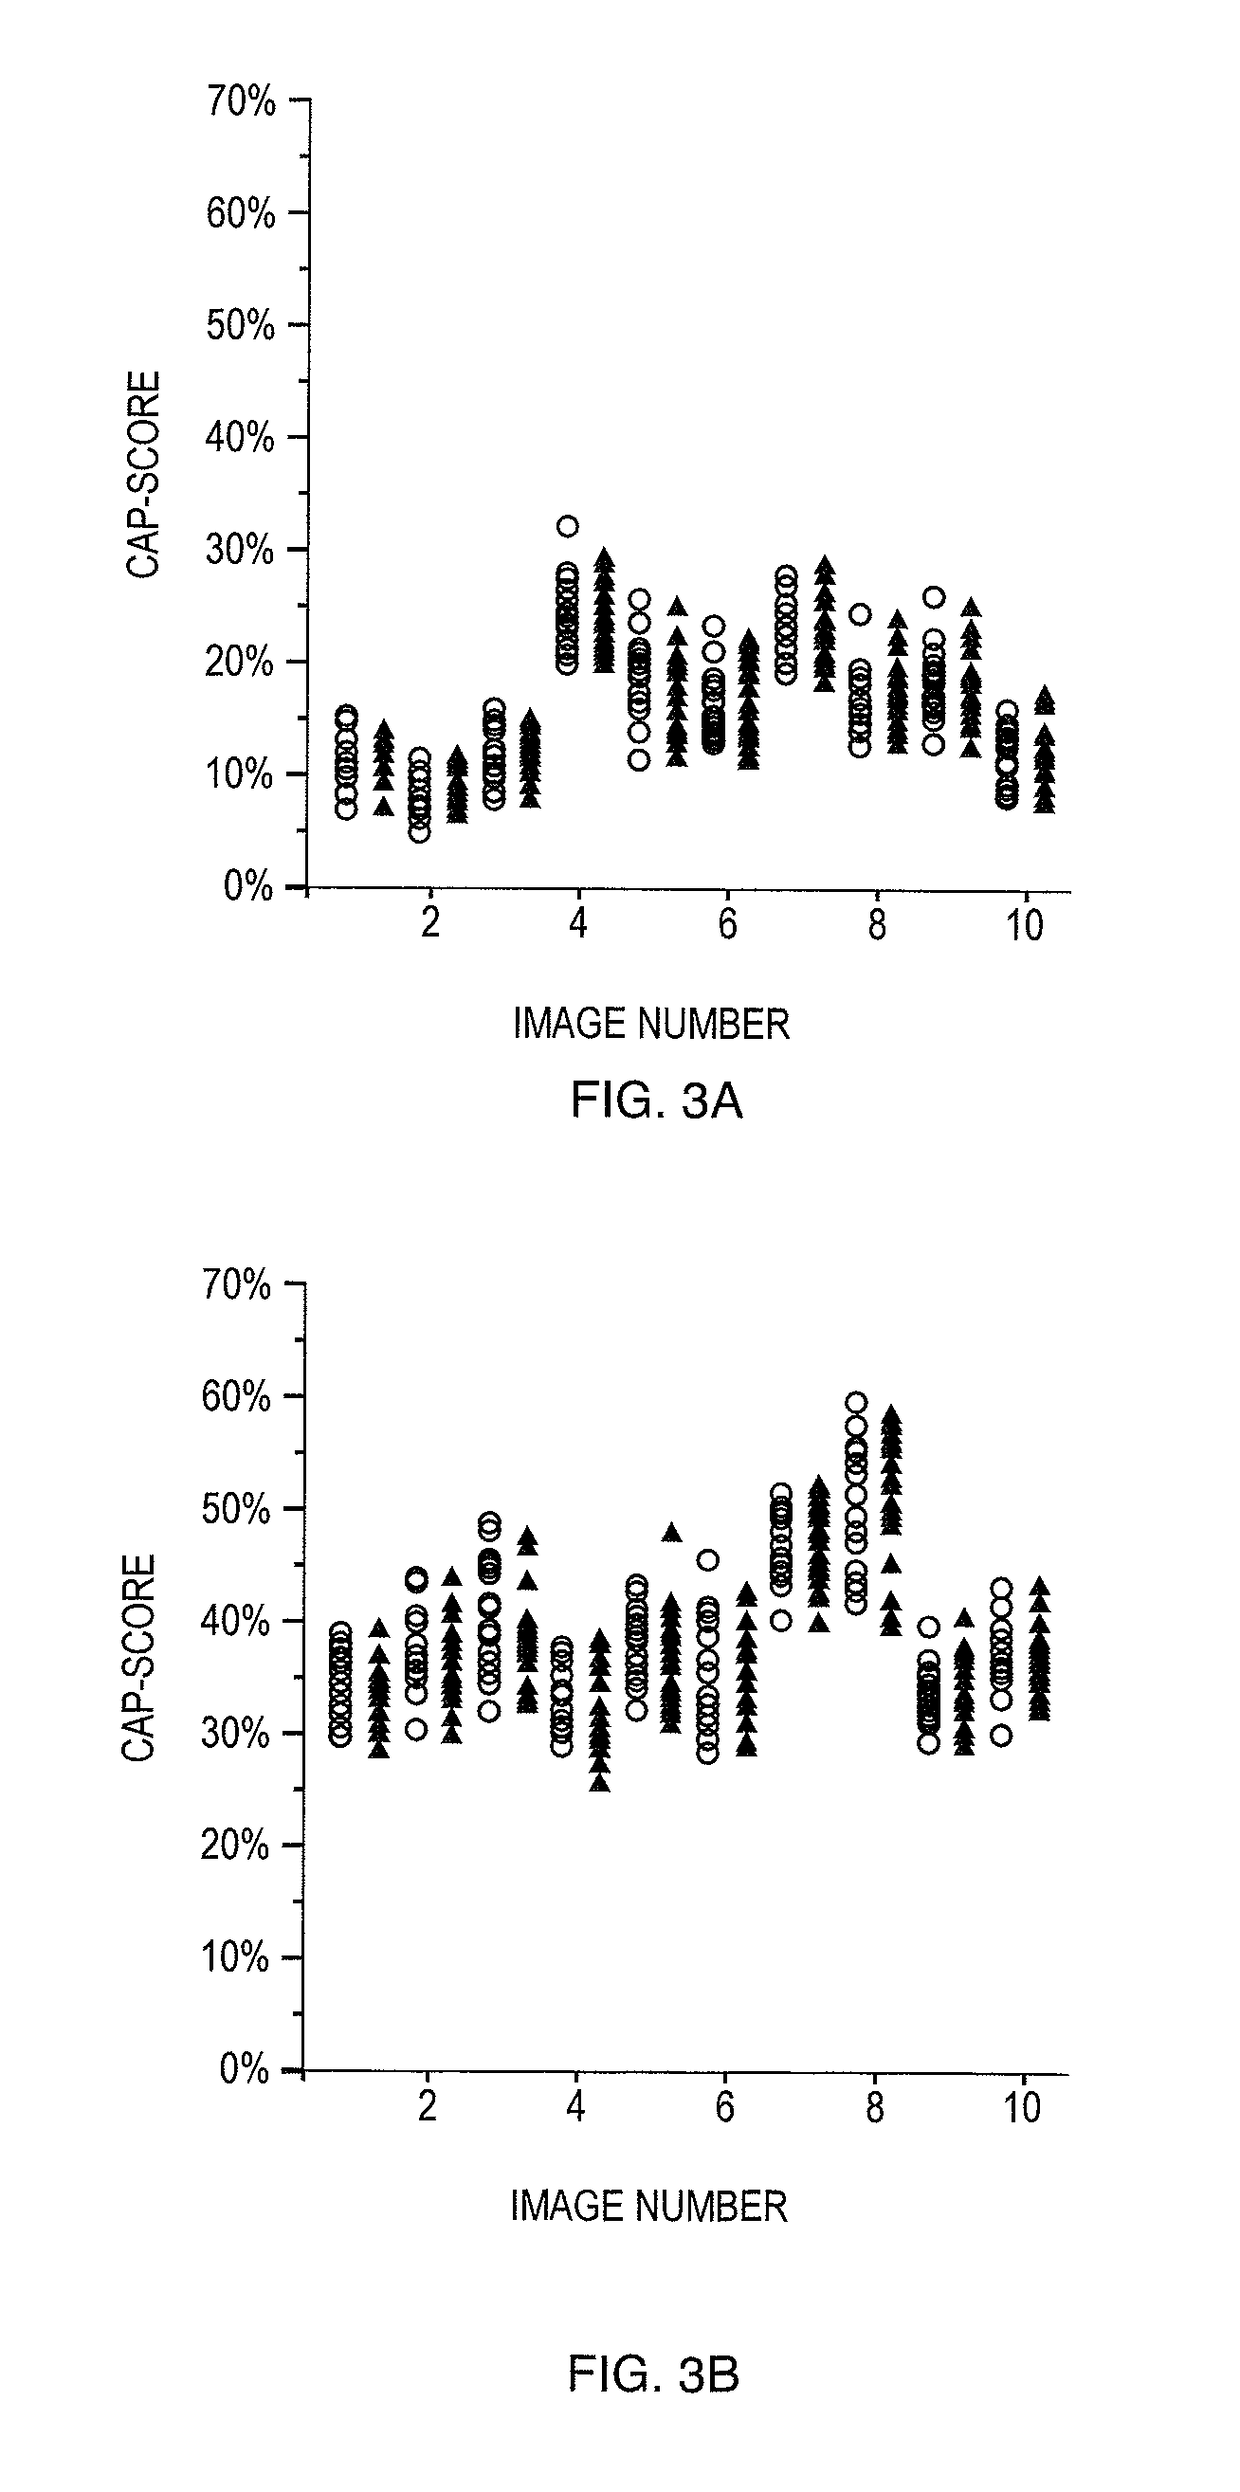 Method to identify an approach for achieving mammalian fertilization and time period for insemination